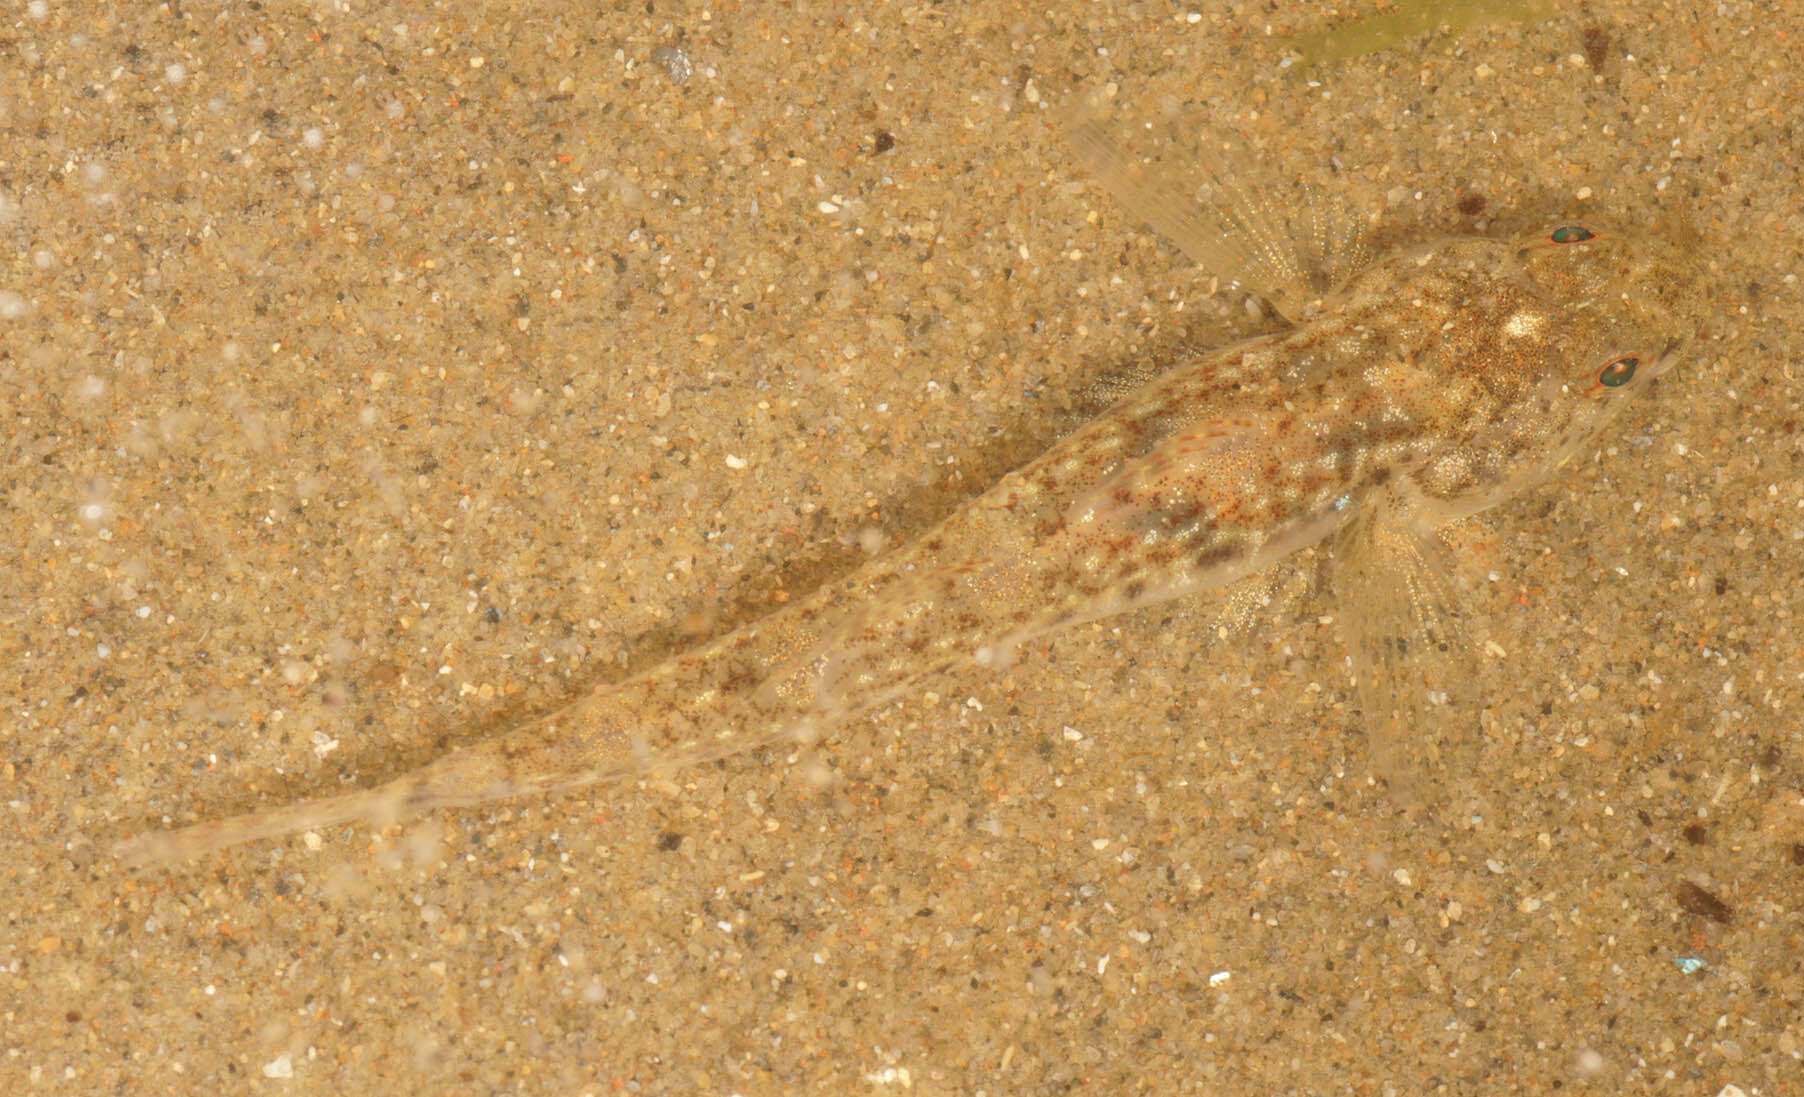 Image of Common Goby